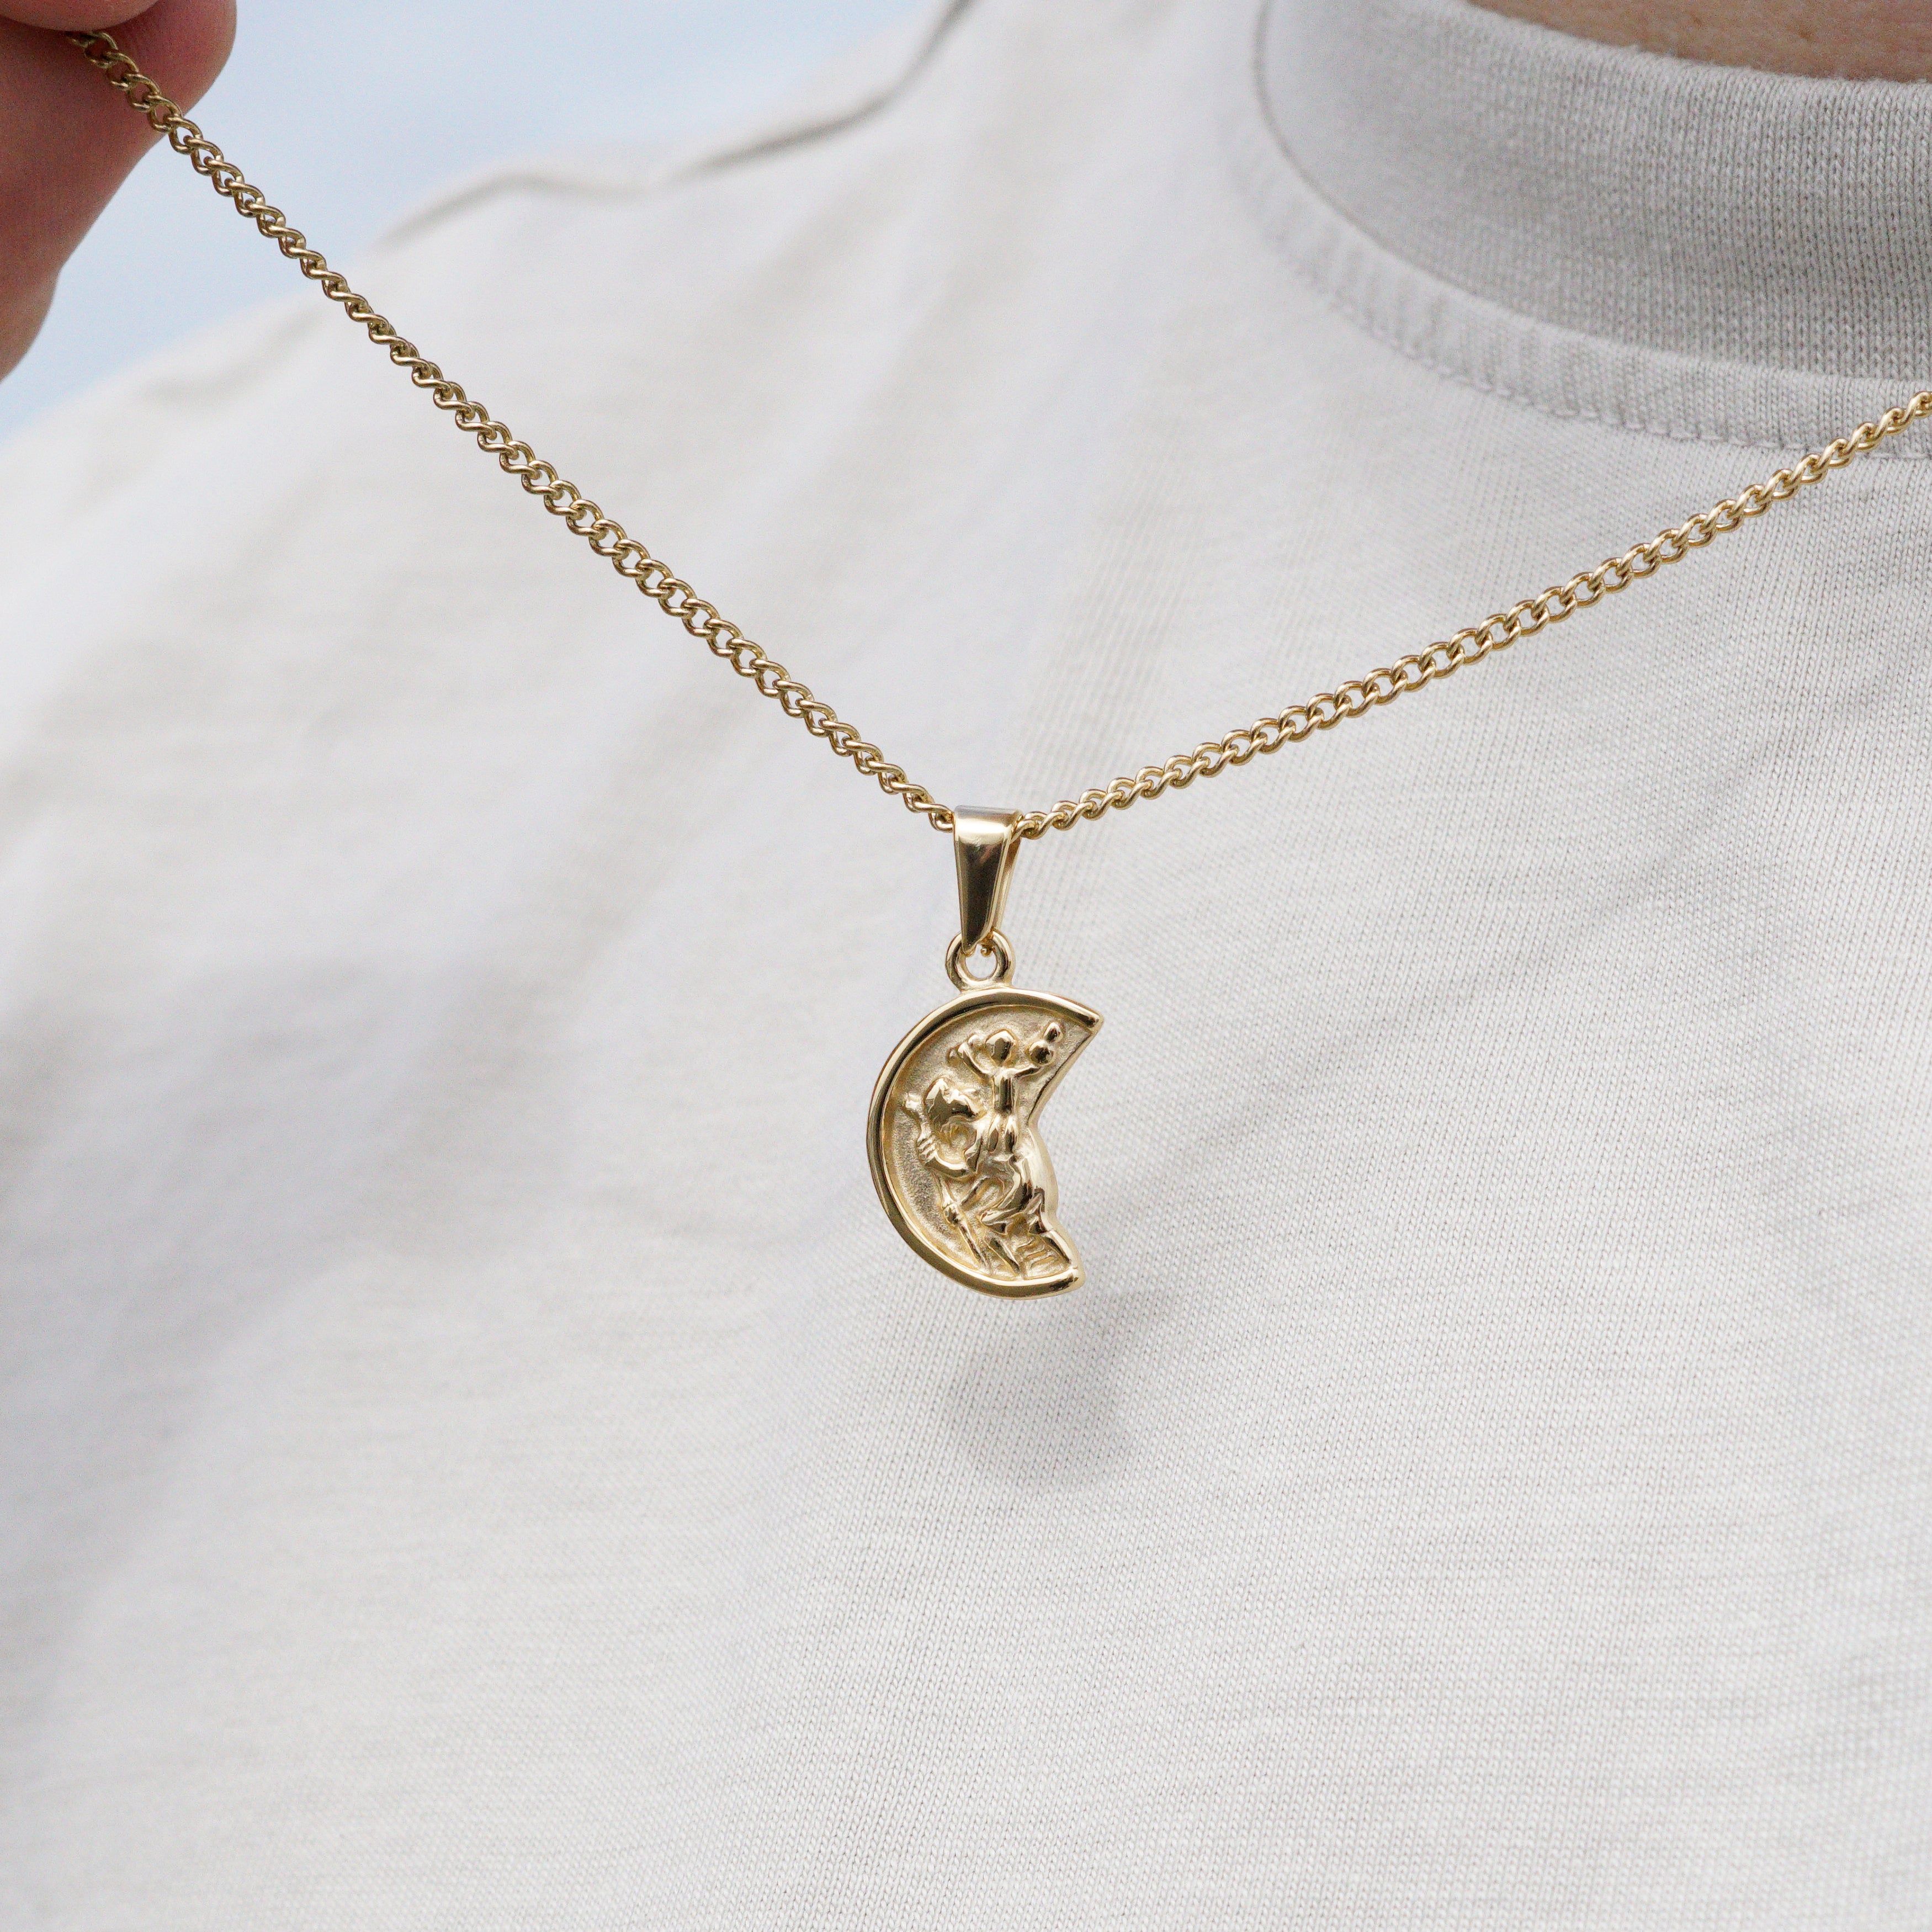 MOON NECKLACE - GOLD